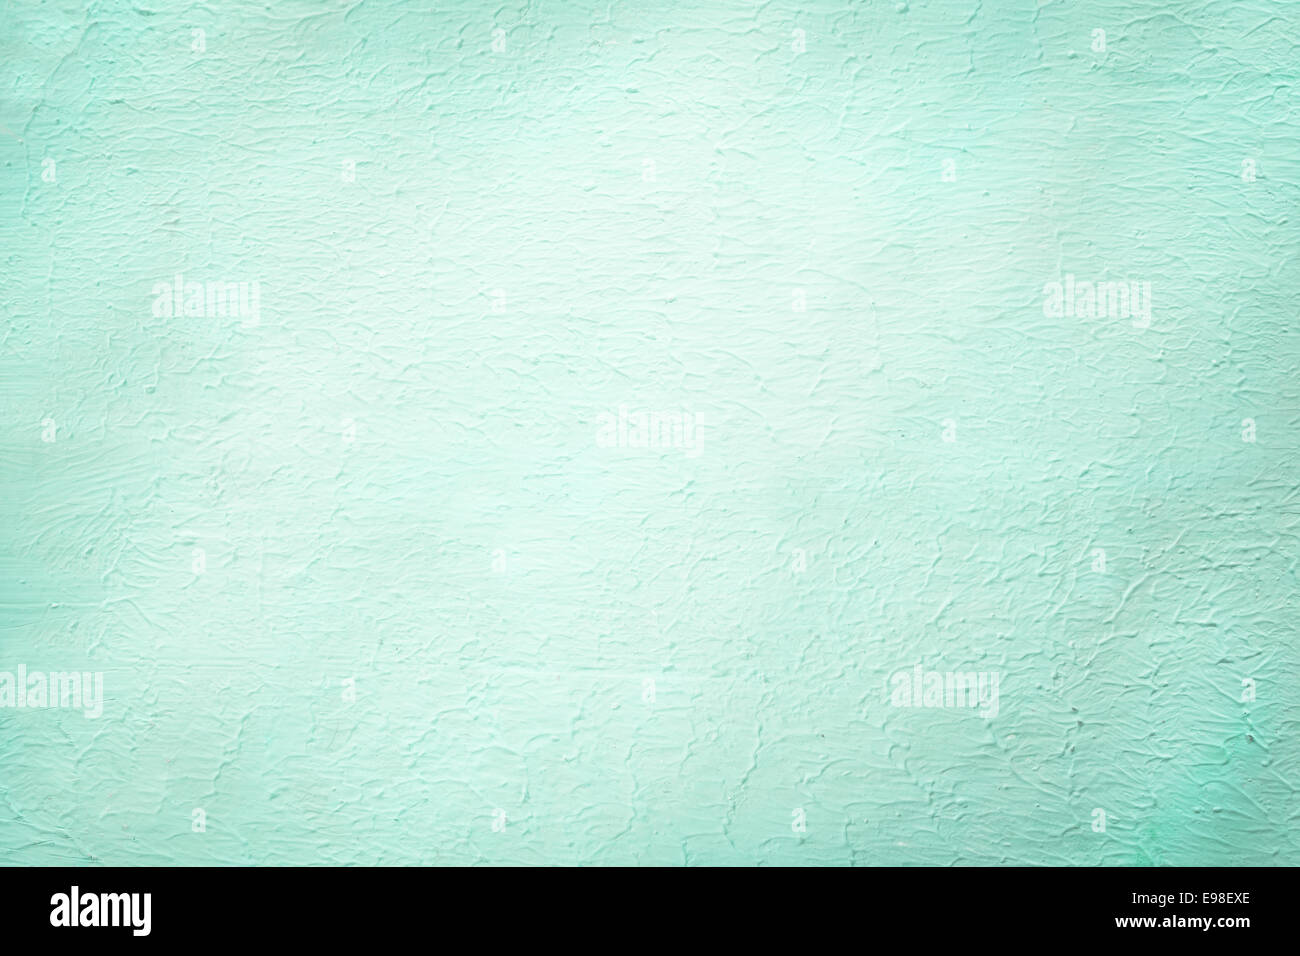 Aquamarine rough plaster surface finish background texture in a 2014 fashion color with a faint vignette and central copyspace Stock Photo